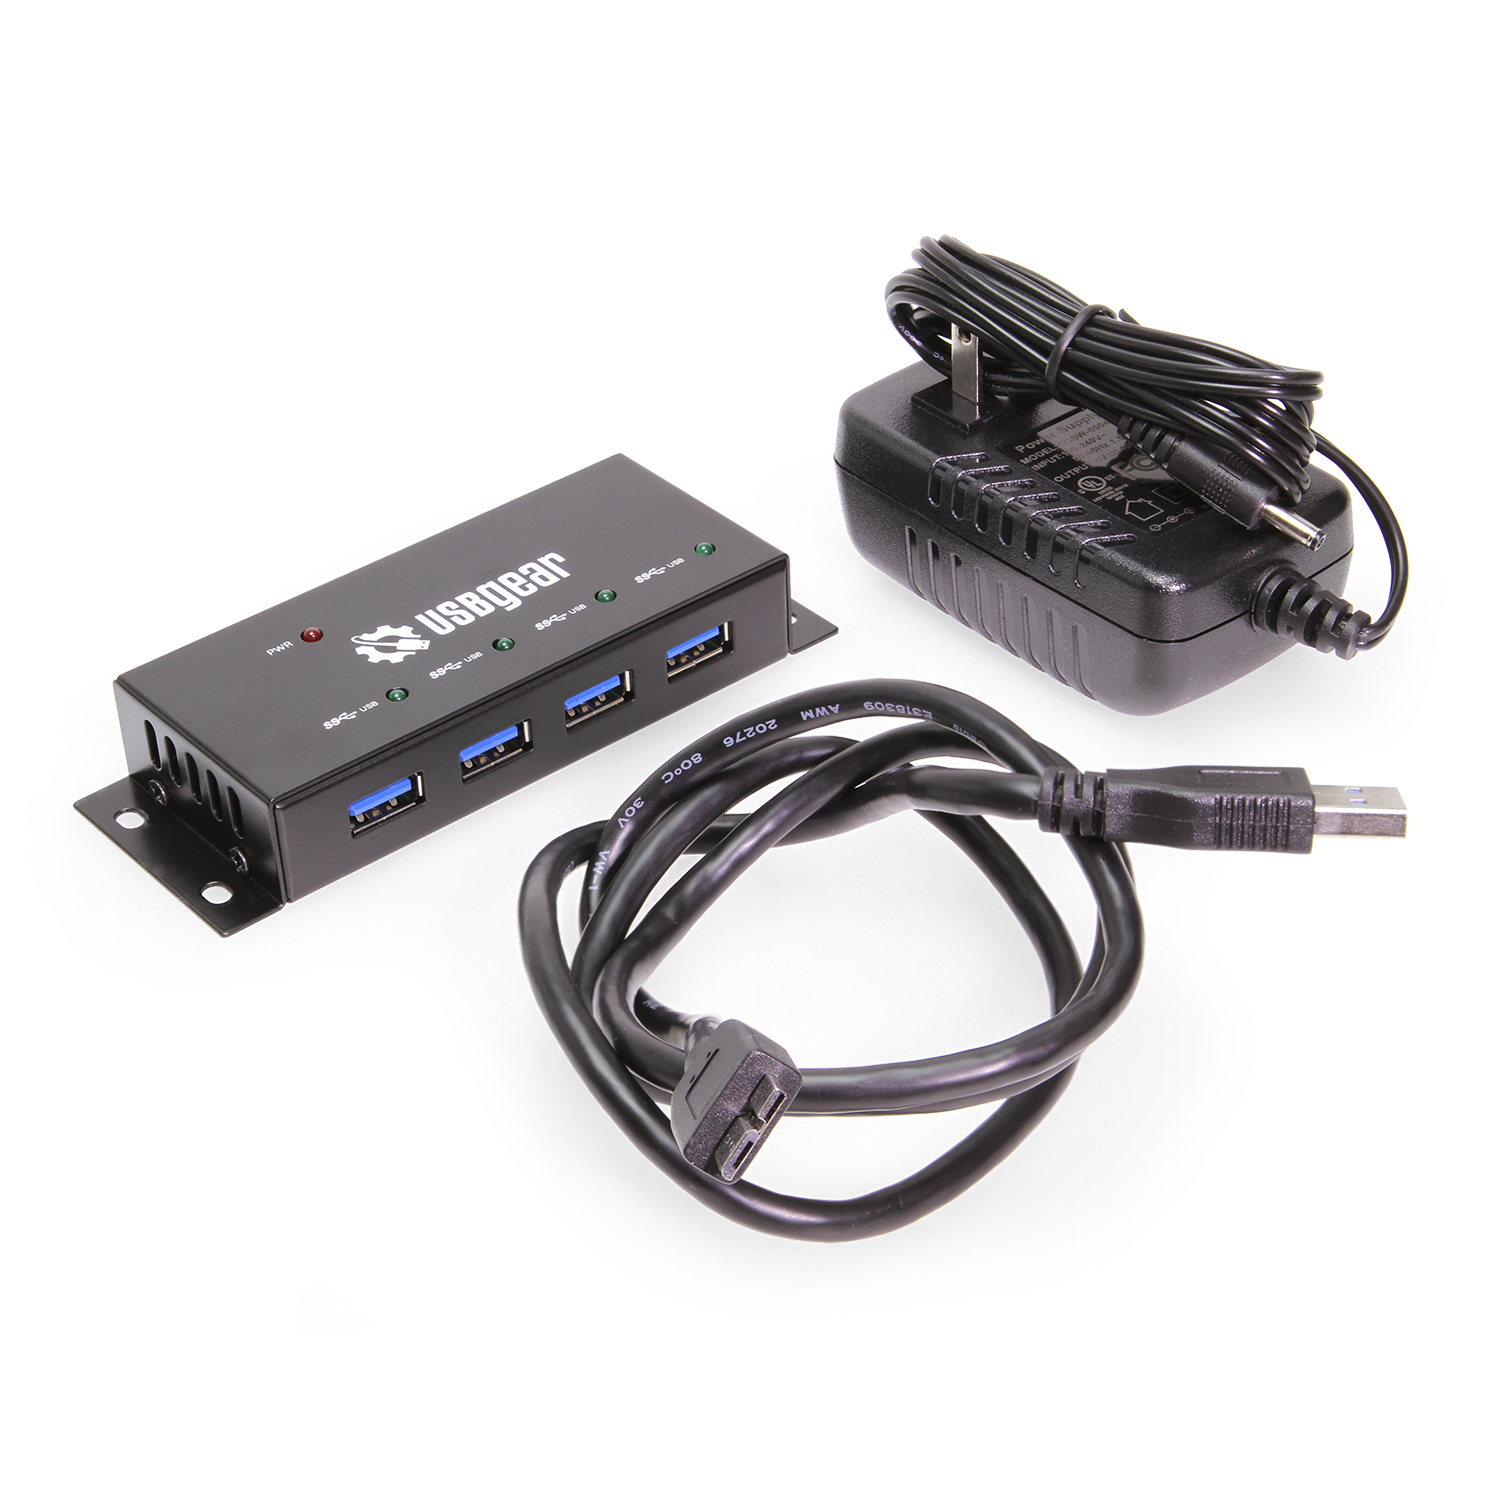 USBGear 10-Port USB 3.2 Gen 1 Mountable Charging and Data Hub with Power  Adapter and Cable